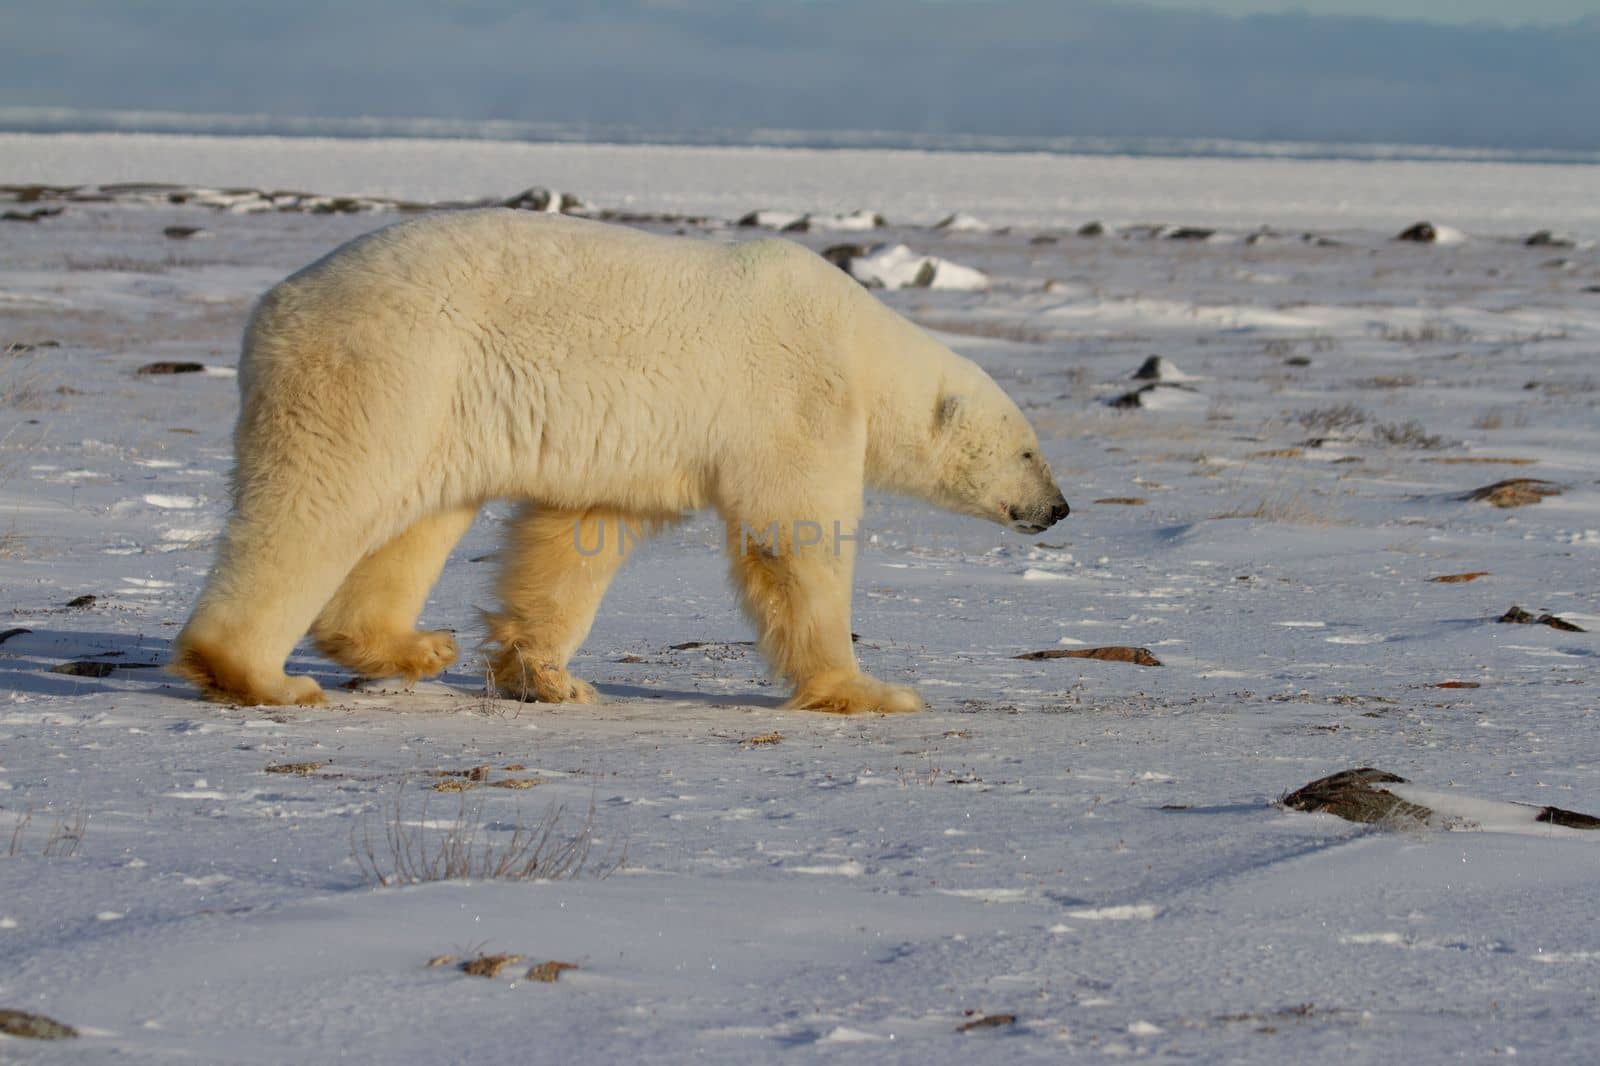 A polar bear, Ursus maritumis, walking on snow among rocks with ice in the background, near Hudson Bay, Churchill, Manitoba, Canada